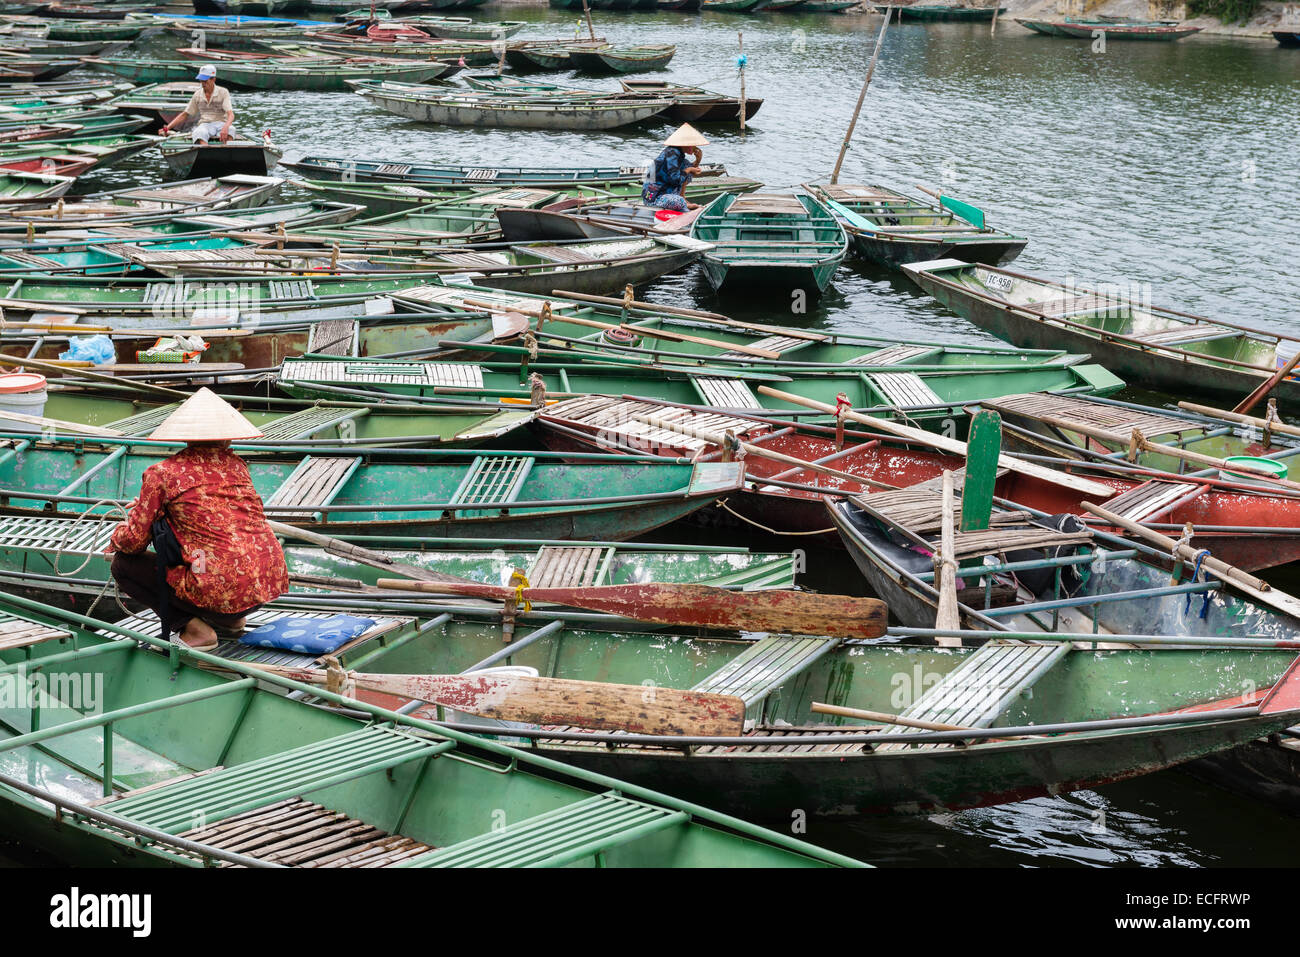 Rowing boats waiting for passengers on Ngo Dong RIver in Northern Vietnam Stock Photo